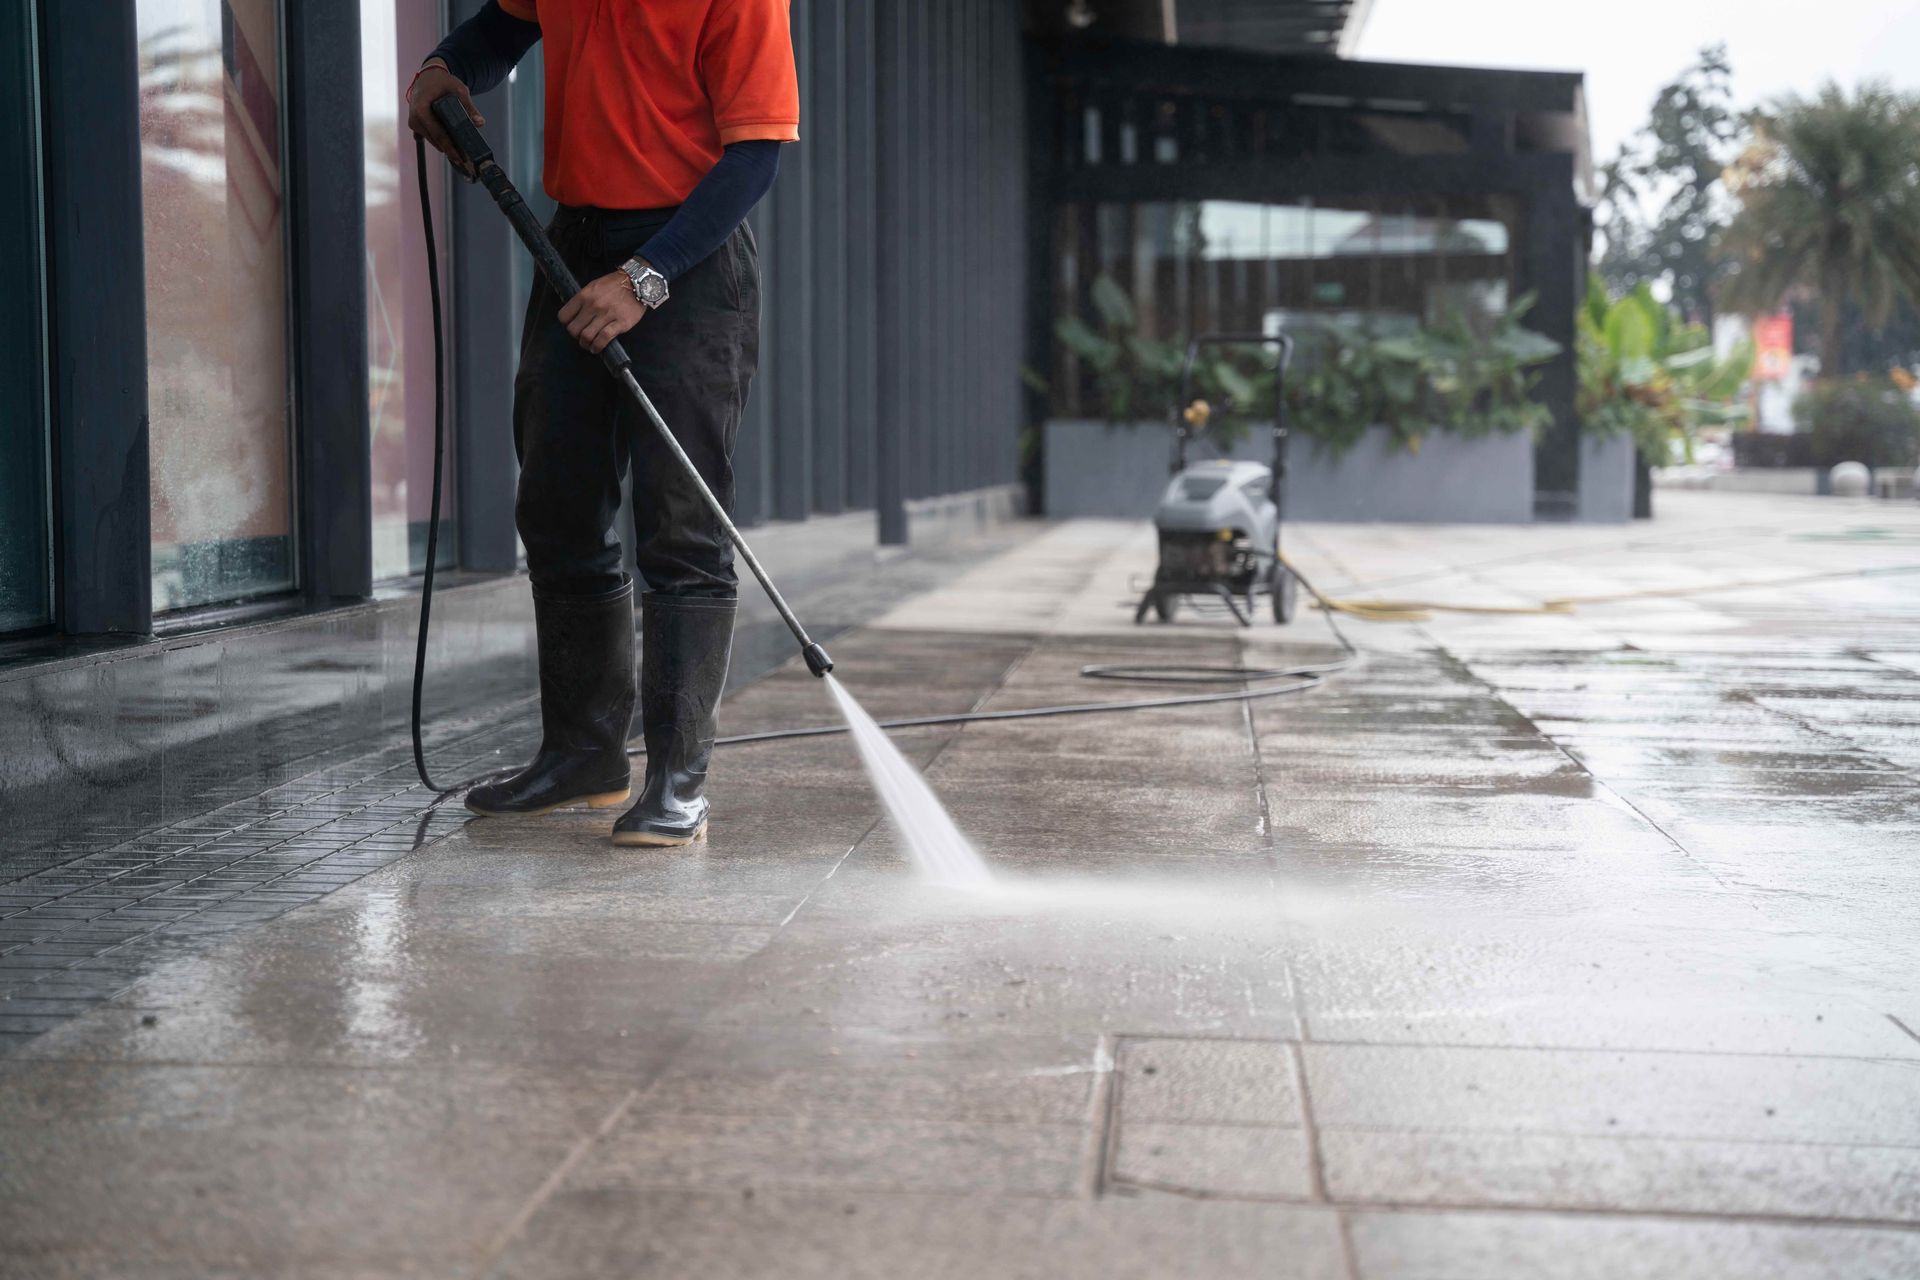 Man cleaning concrete using pressure washer